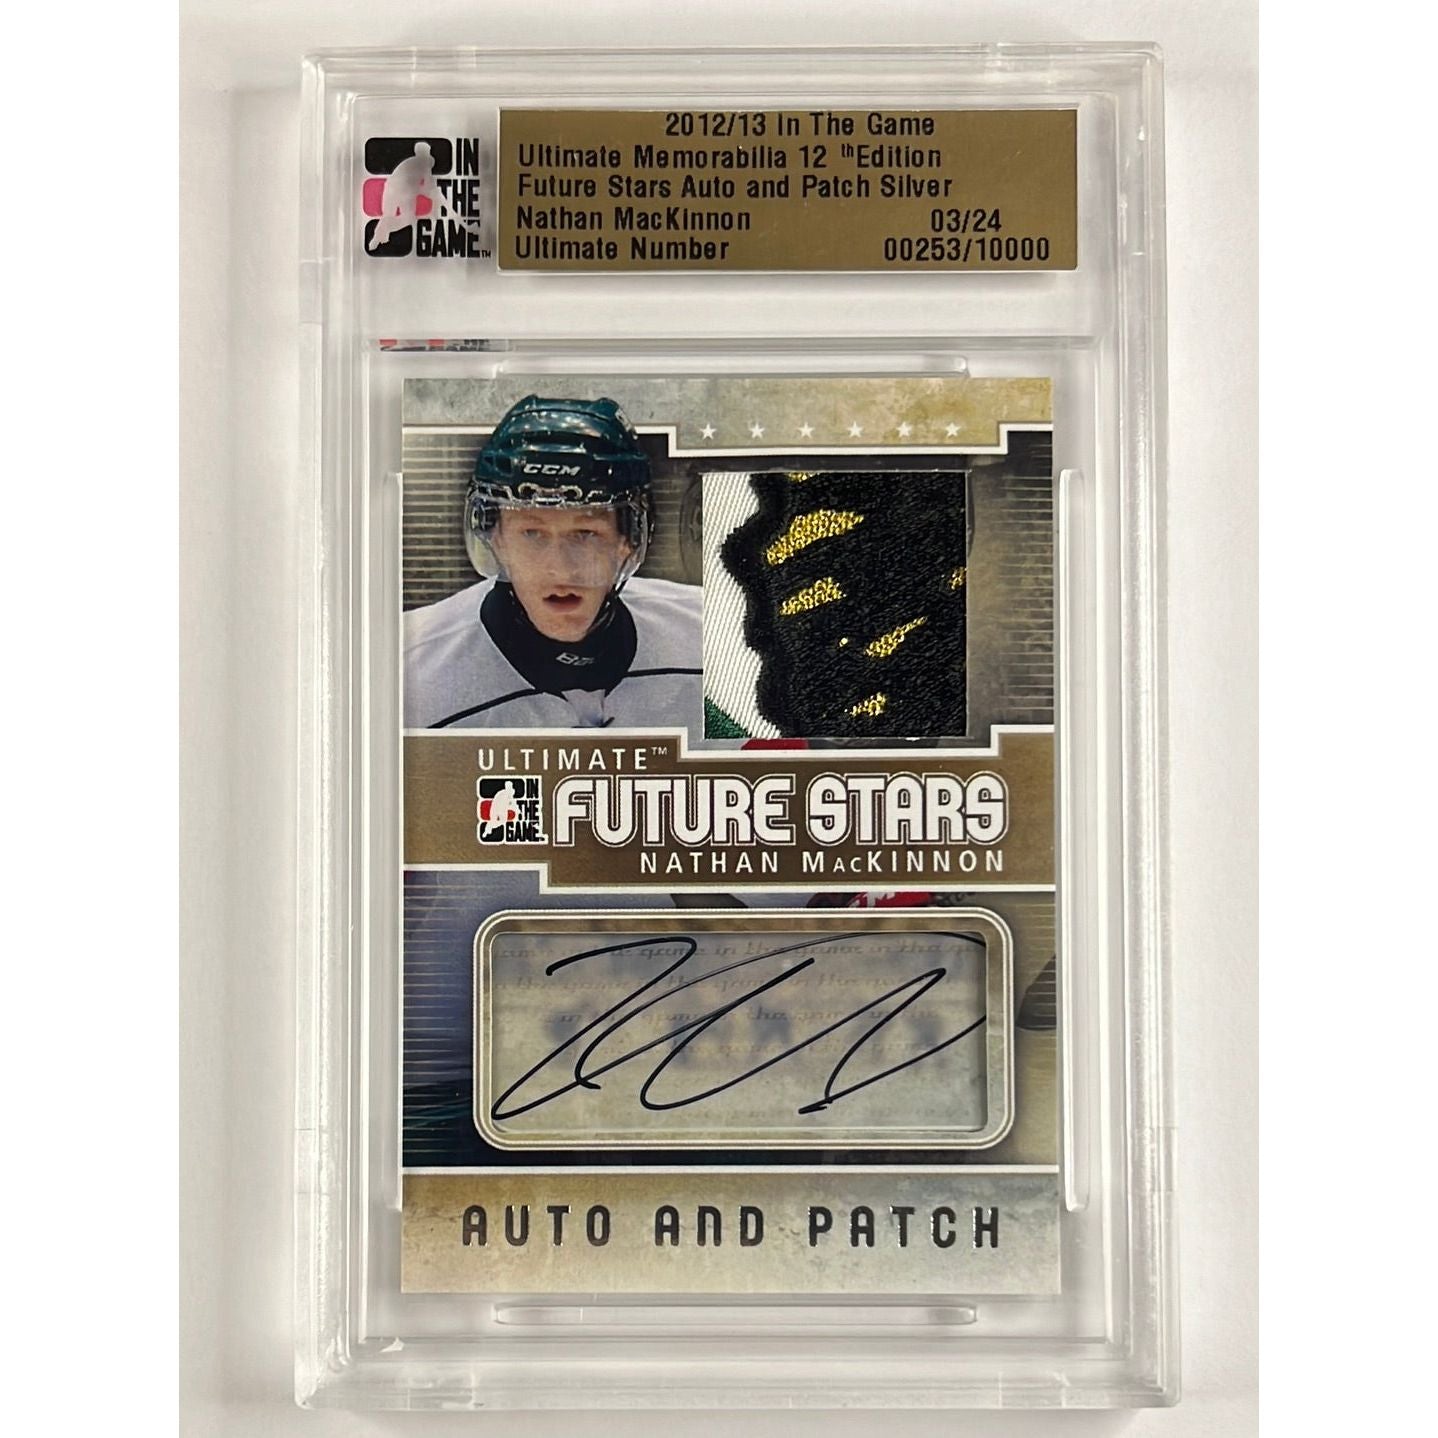 2012-13 In The Game Nathan Mackinnon Future Stars Auto & Patch  03/24